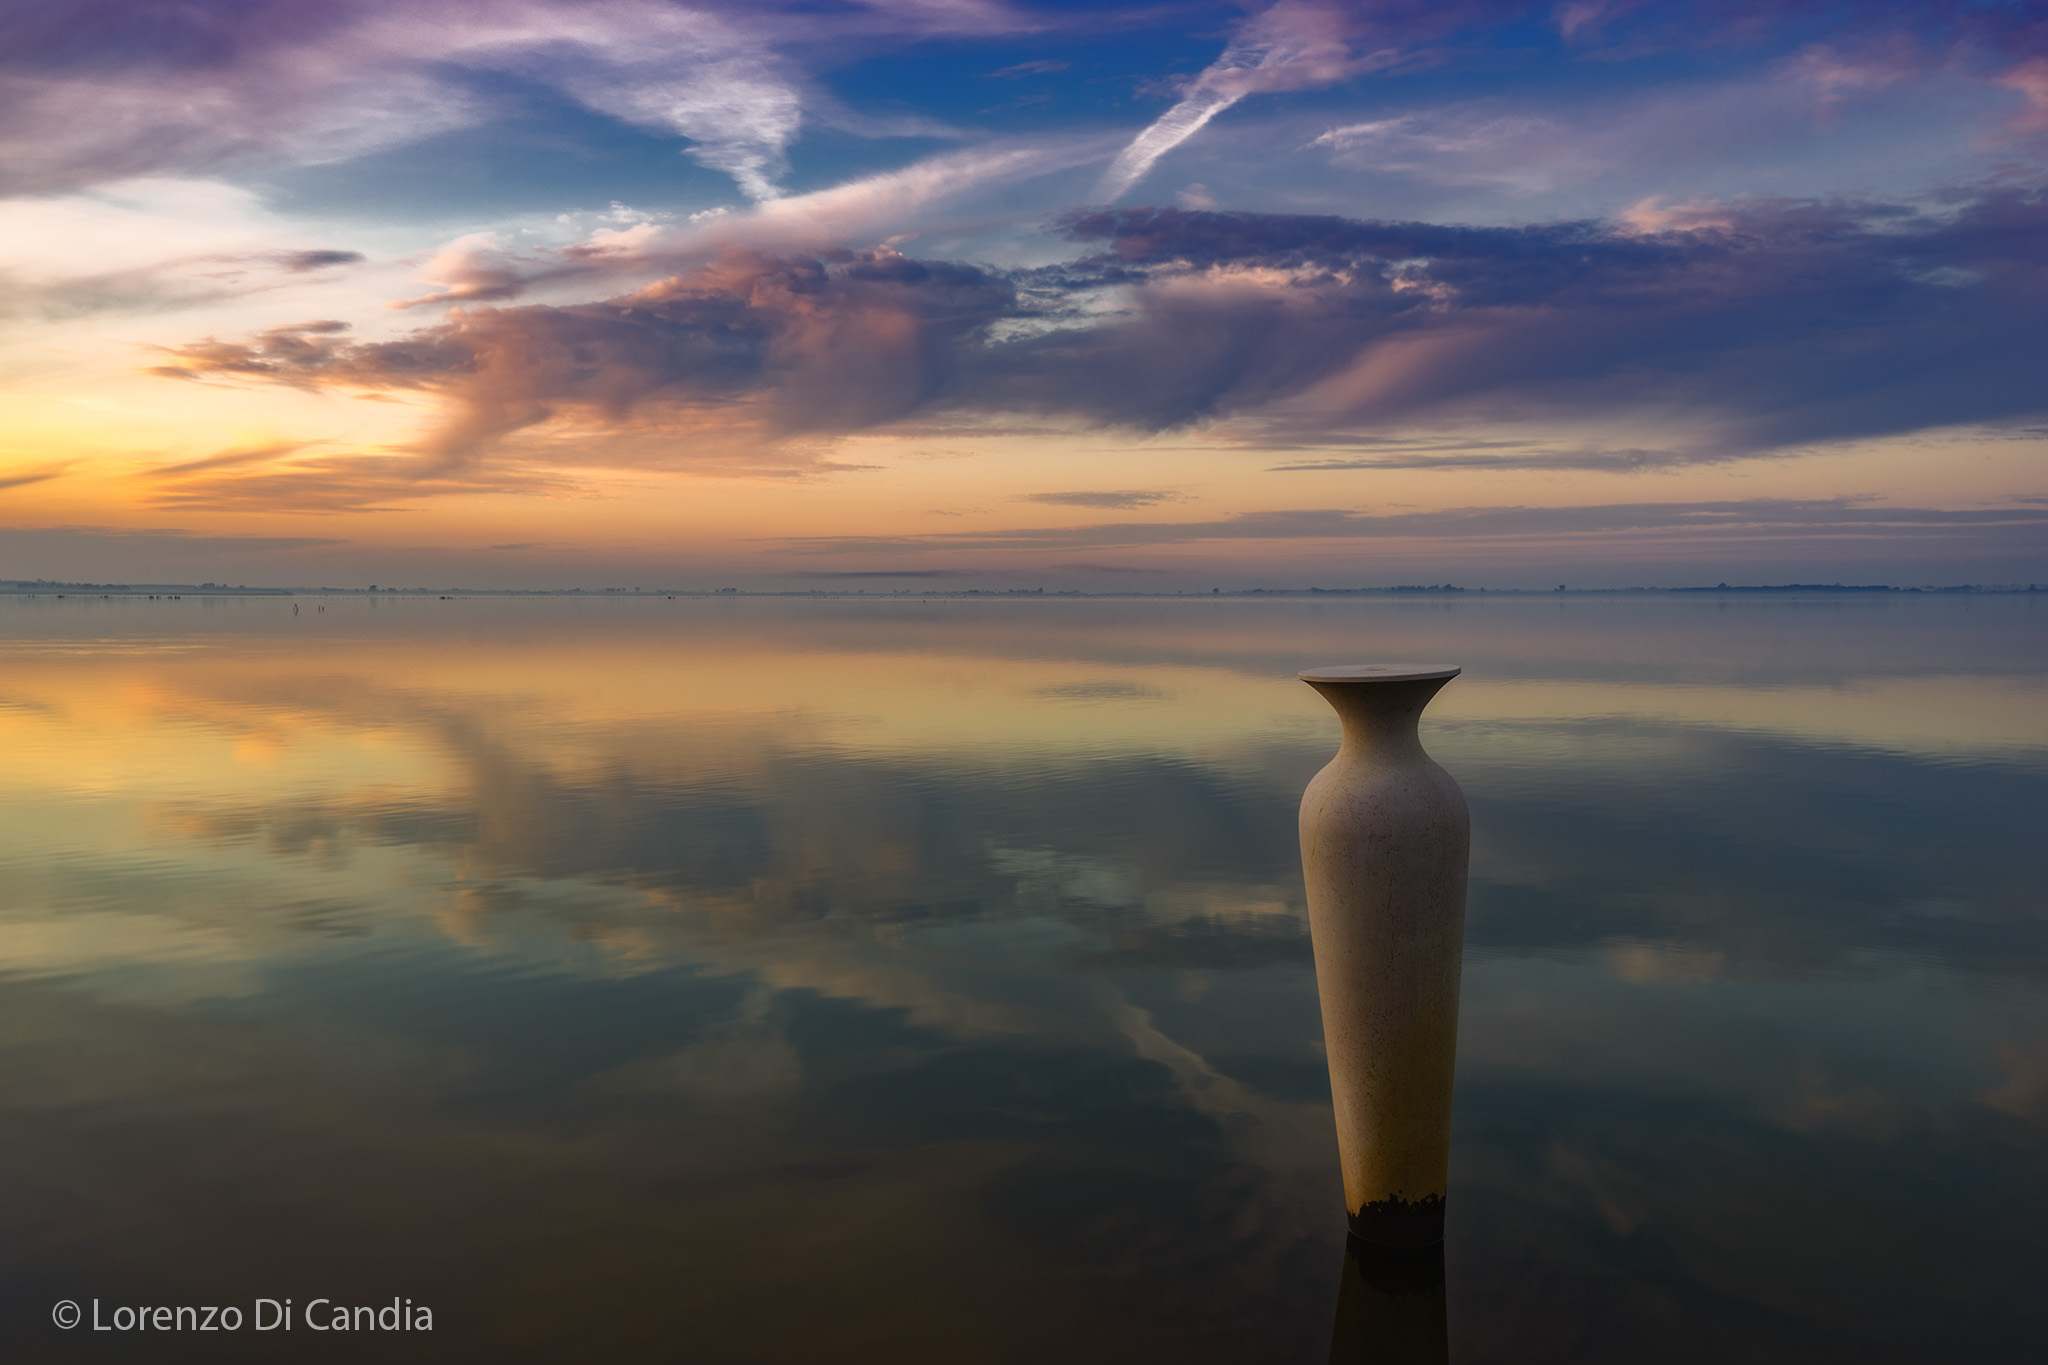 The Vase on the Lake...